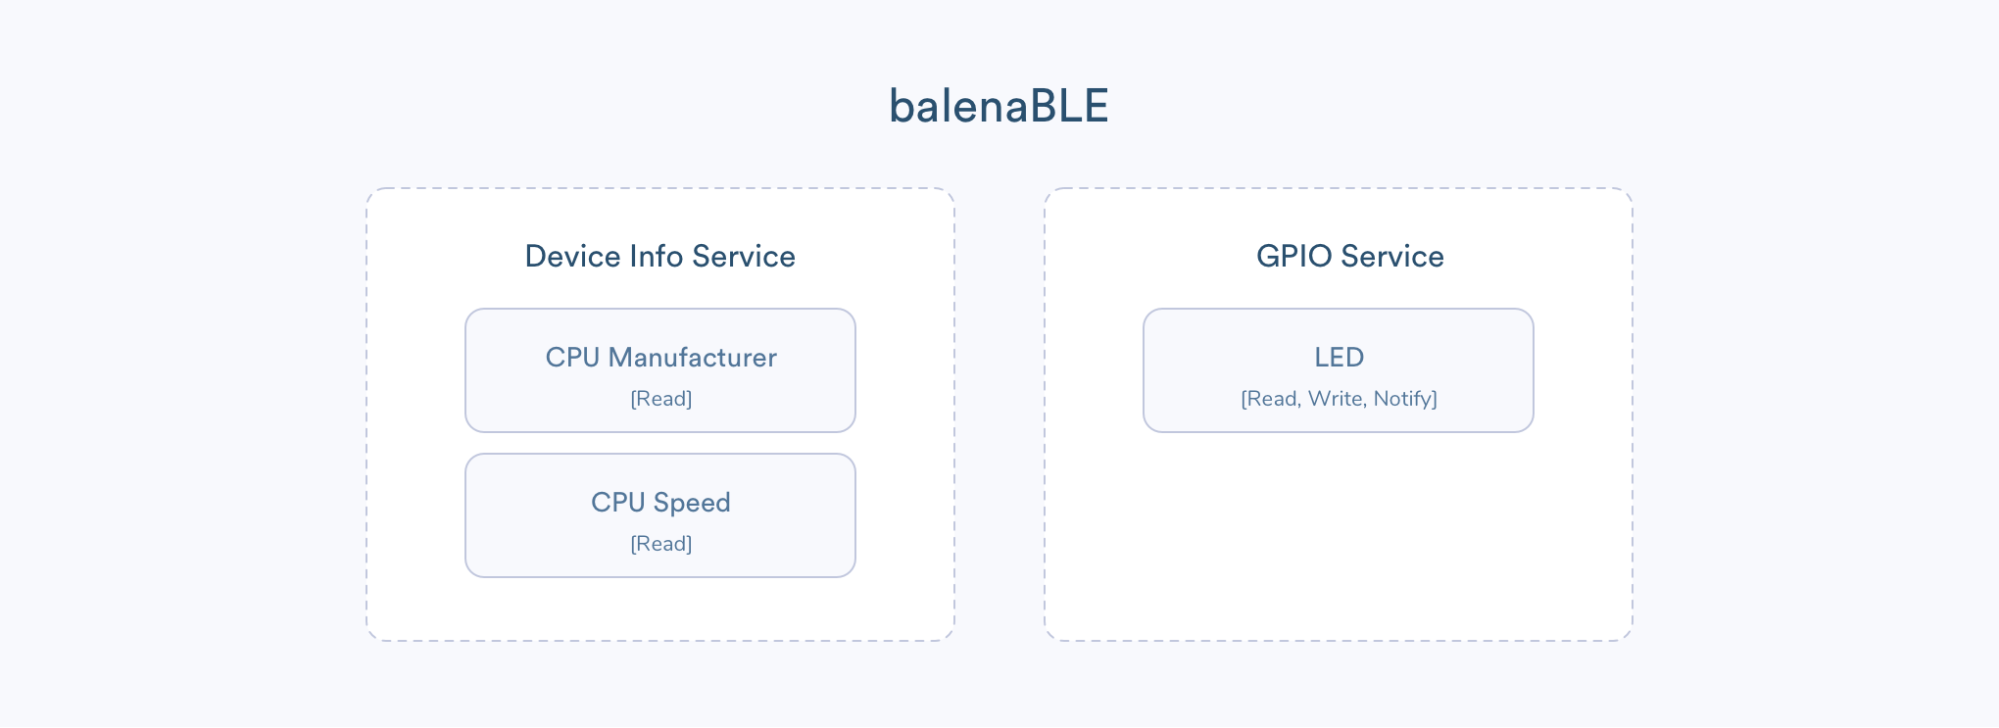 Here's a high level look at configuring balenaBLE.